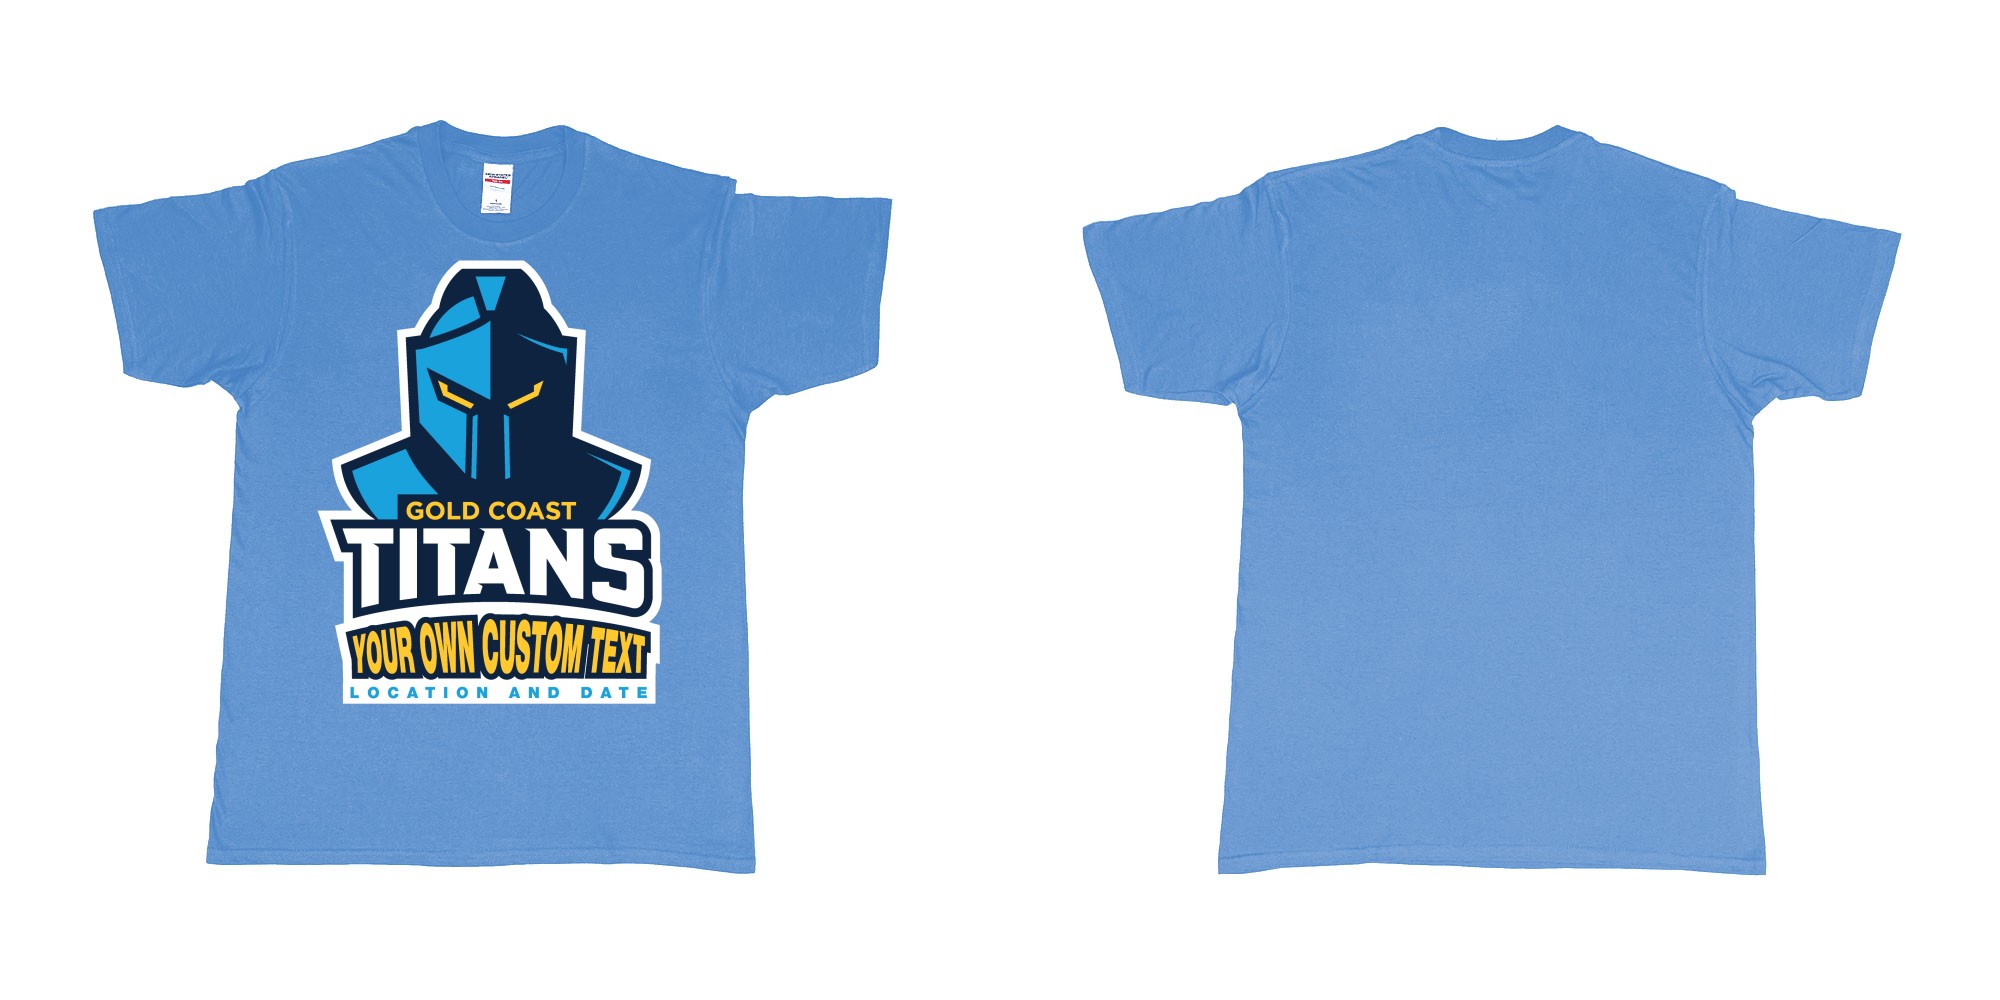 Custom tshirt design gold coast titans own custom design print in fabric color carolina-blue choice your own text made in Bali by The Pirate Way